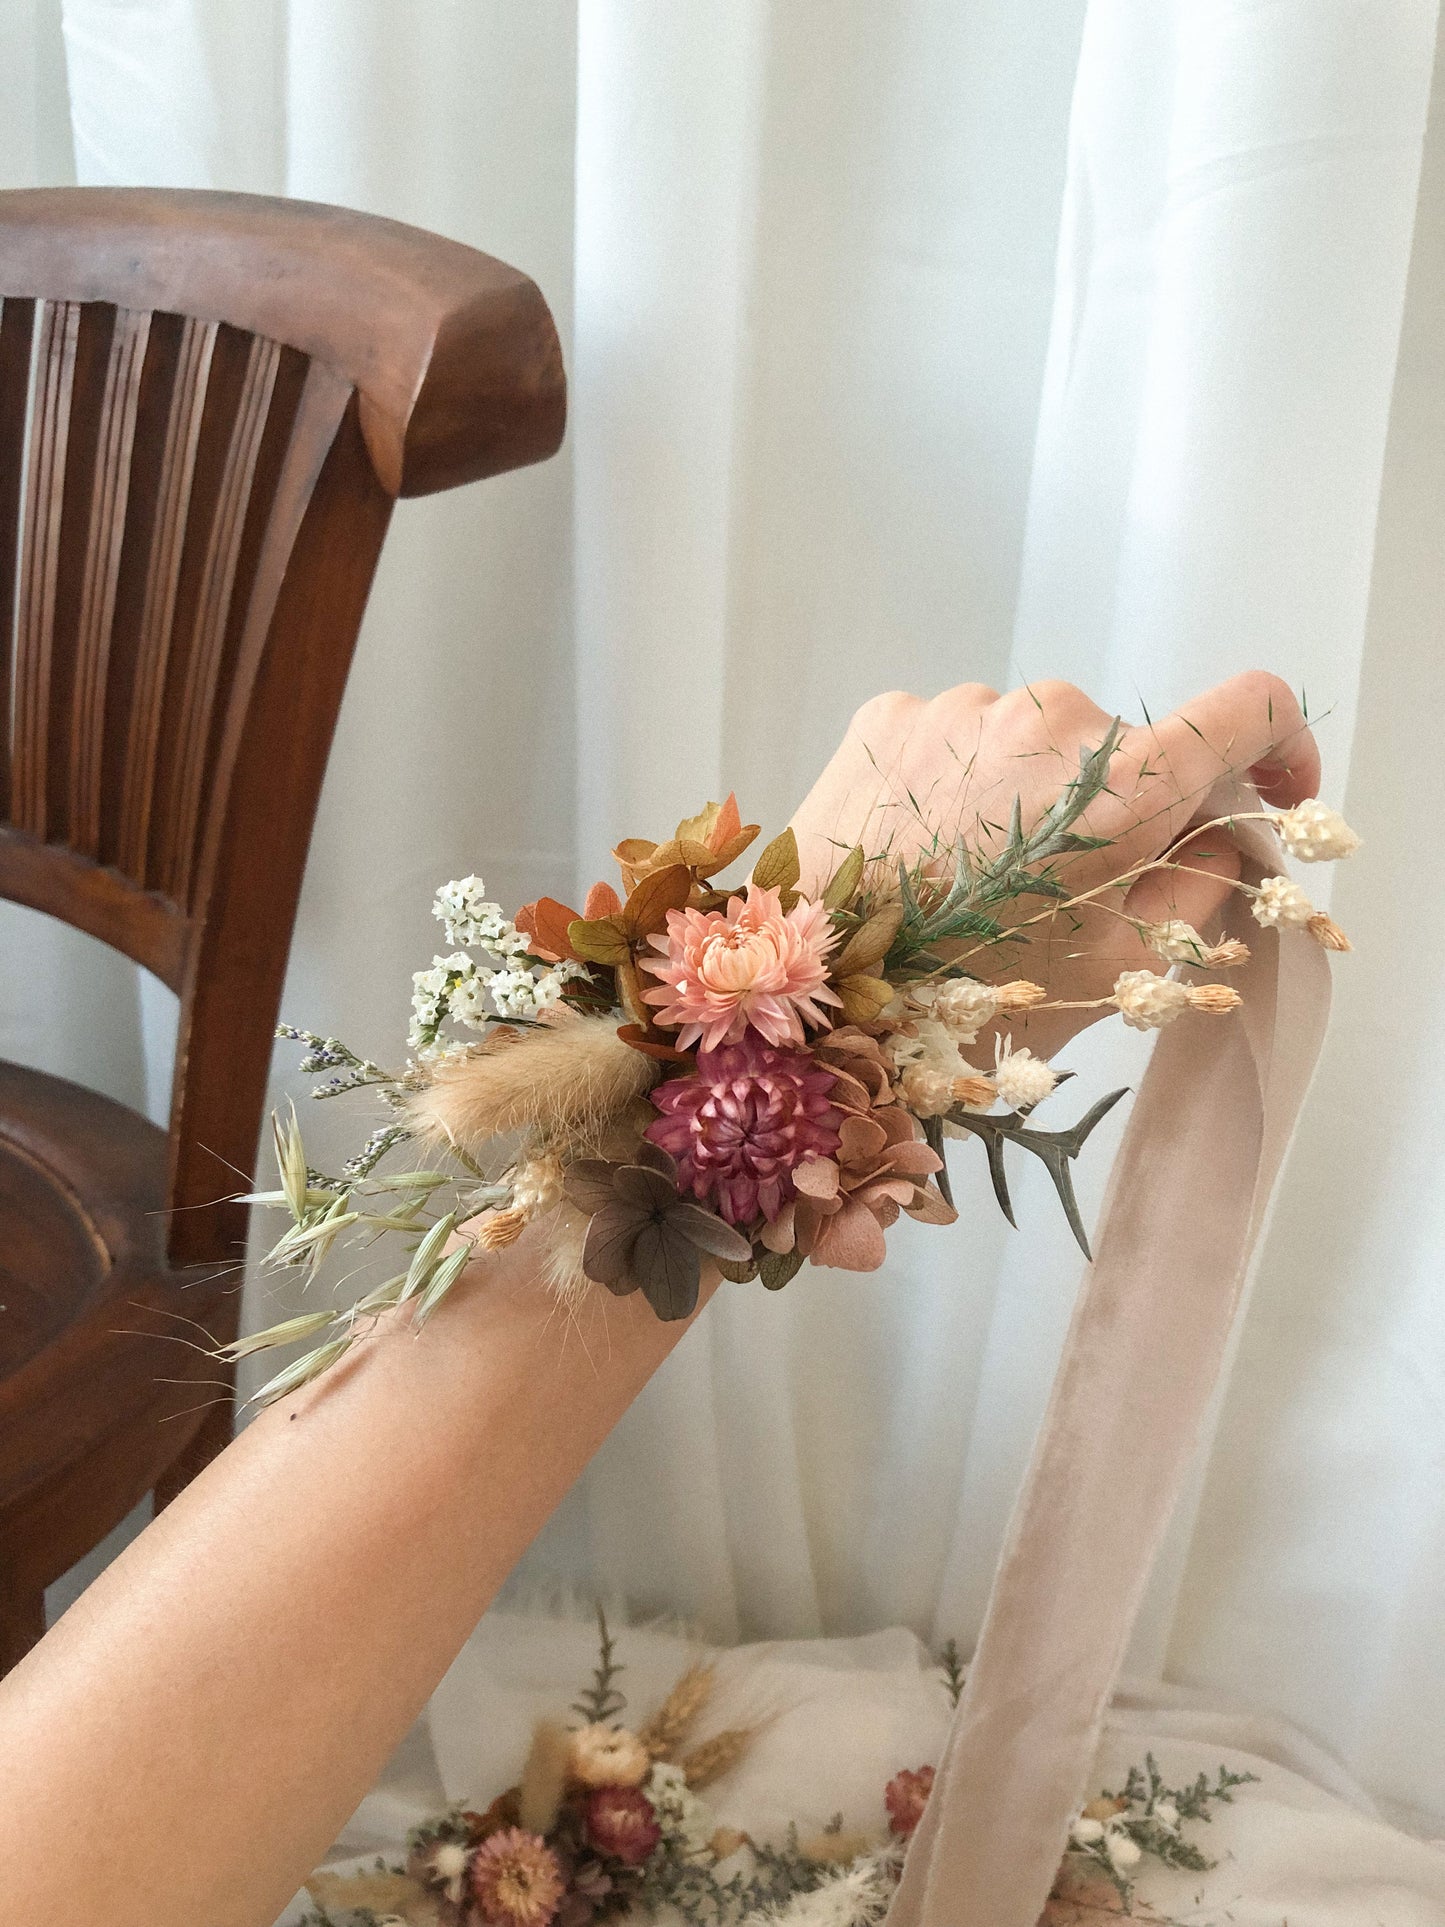 Add on: Preserved Wrist Corsages